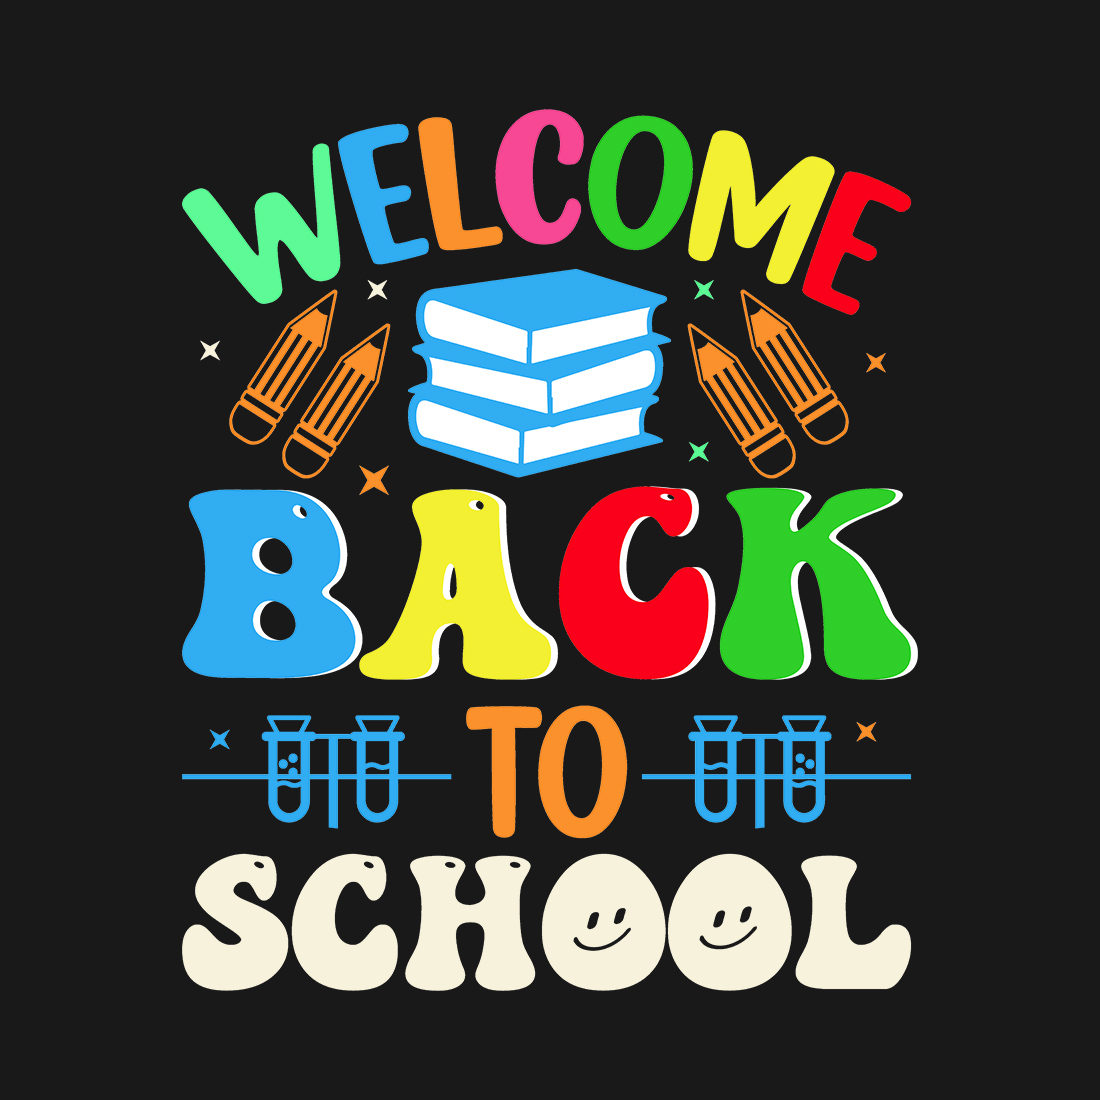 Back to School Quote T-shirt Design image cover.